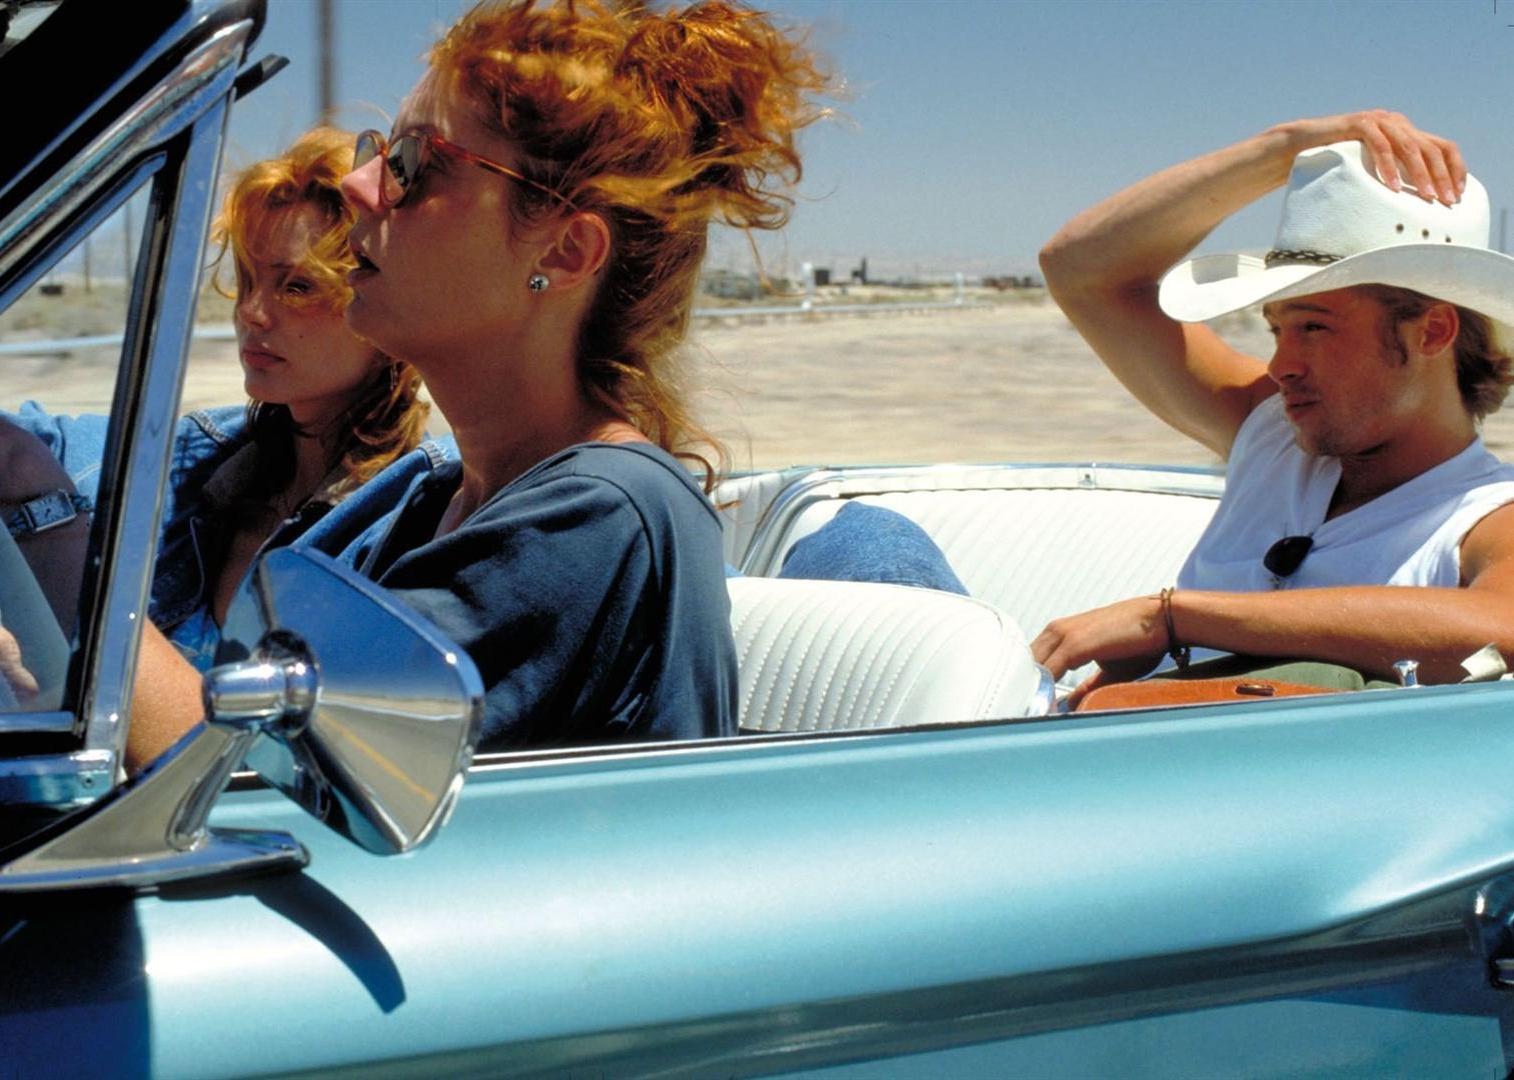 Brad Pitt in a cowboy hat riding in the back of a convertible with Geena Davis and Susan Sarandon in the front.